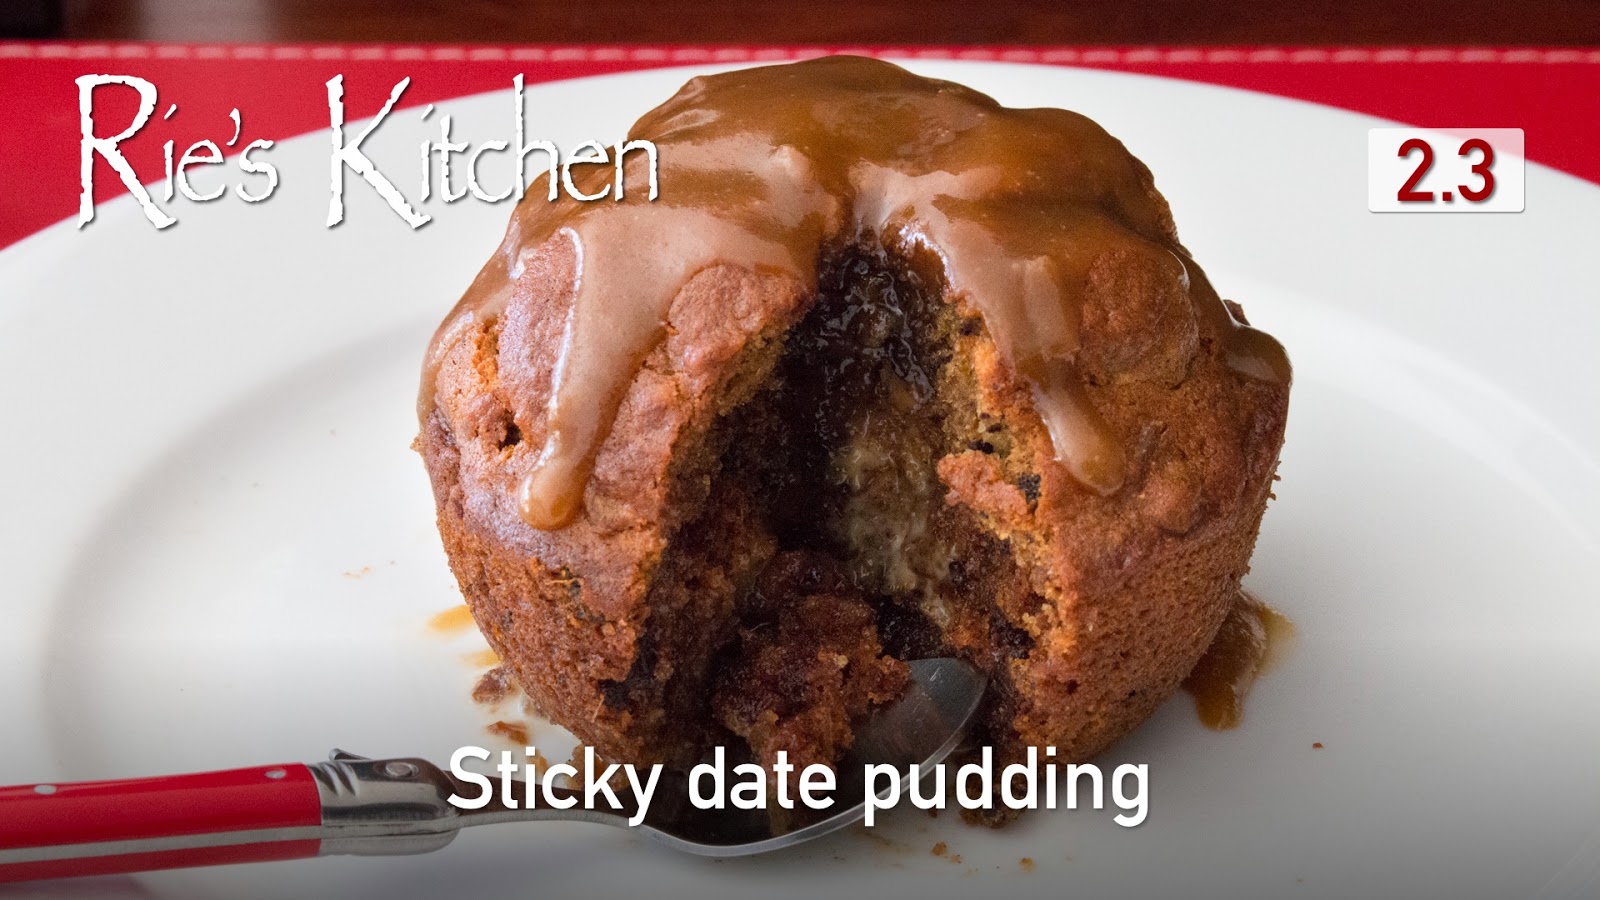 Winter warmer - Sticky Date Pudding, episode 2.3